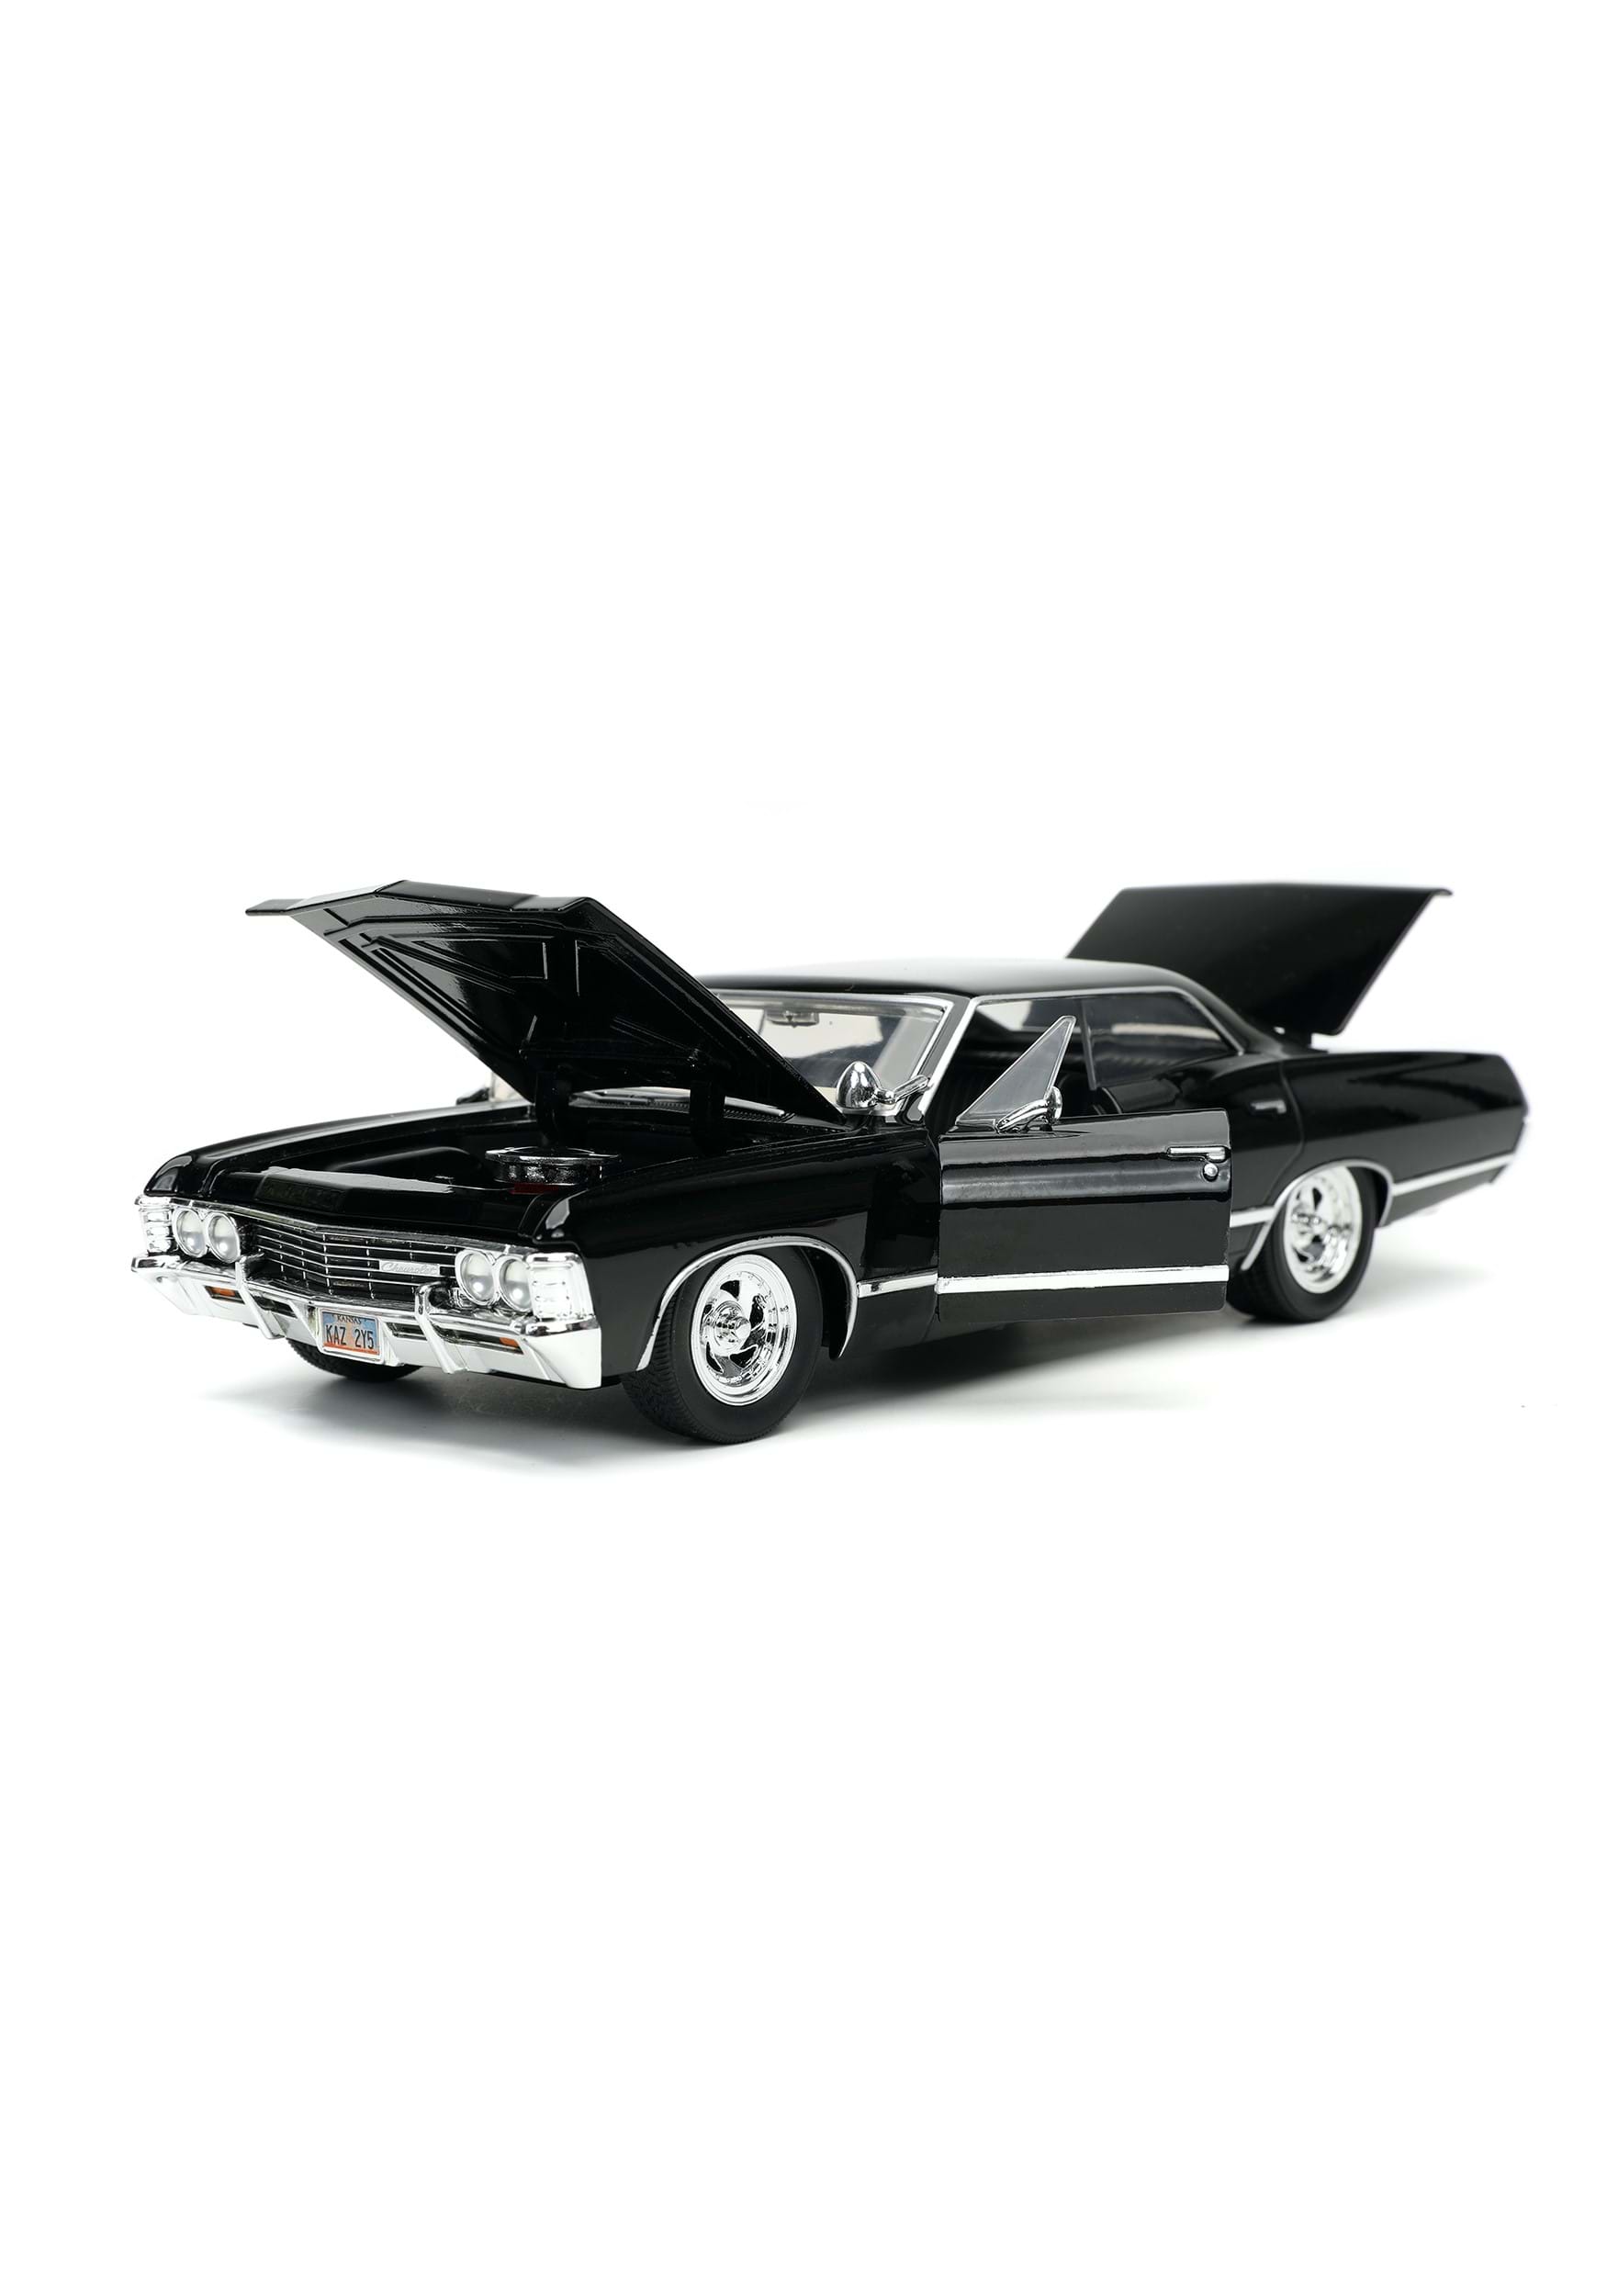 1:24 '67 Chevy Impala with Dean from Supernatural